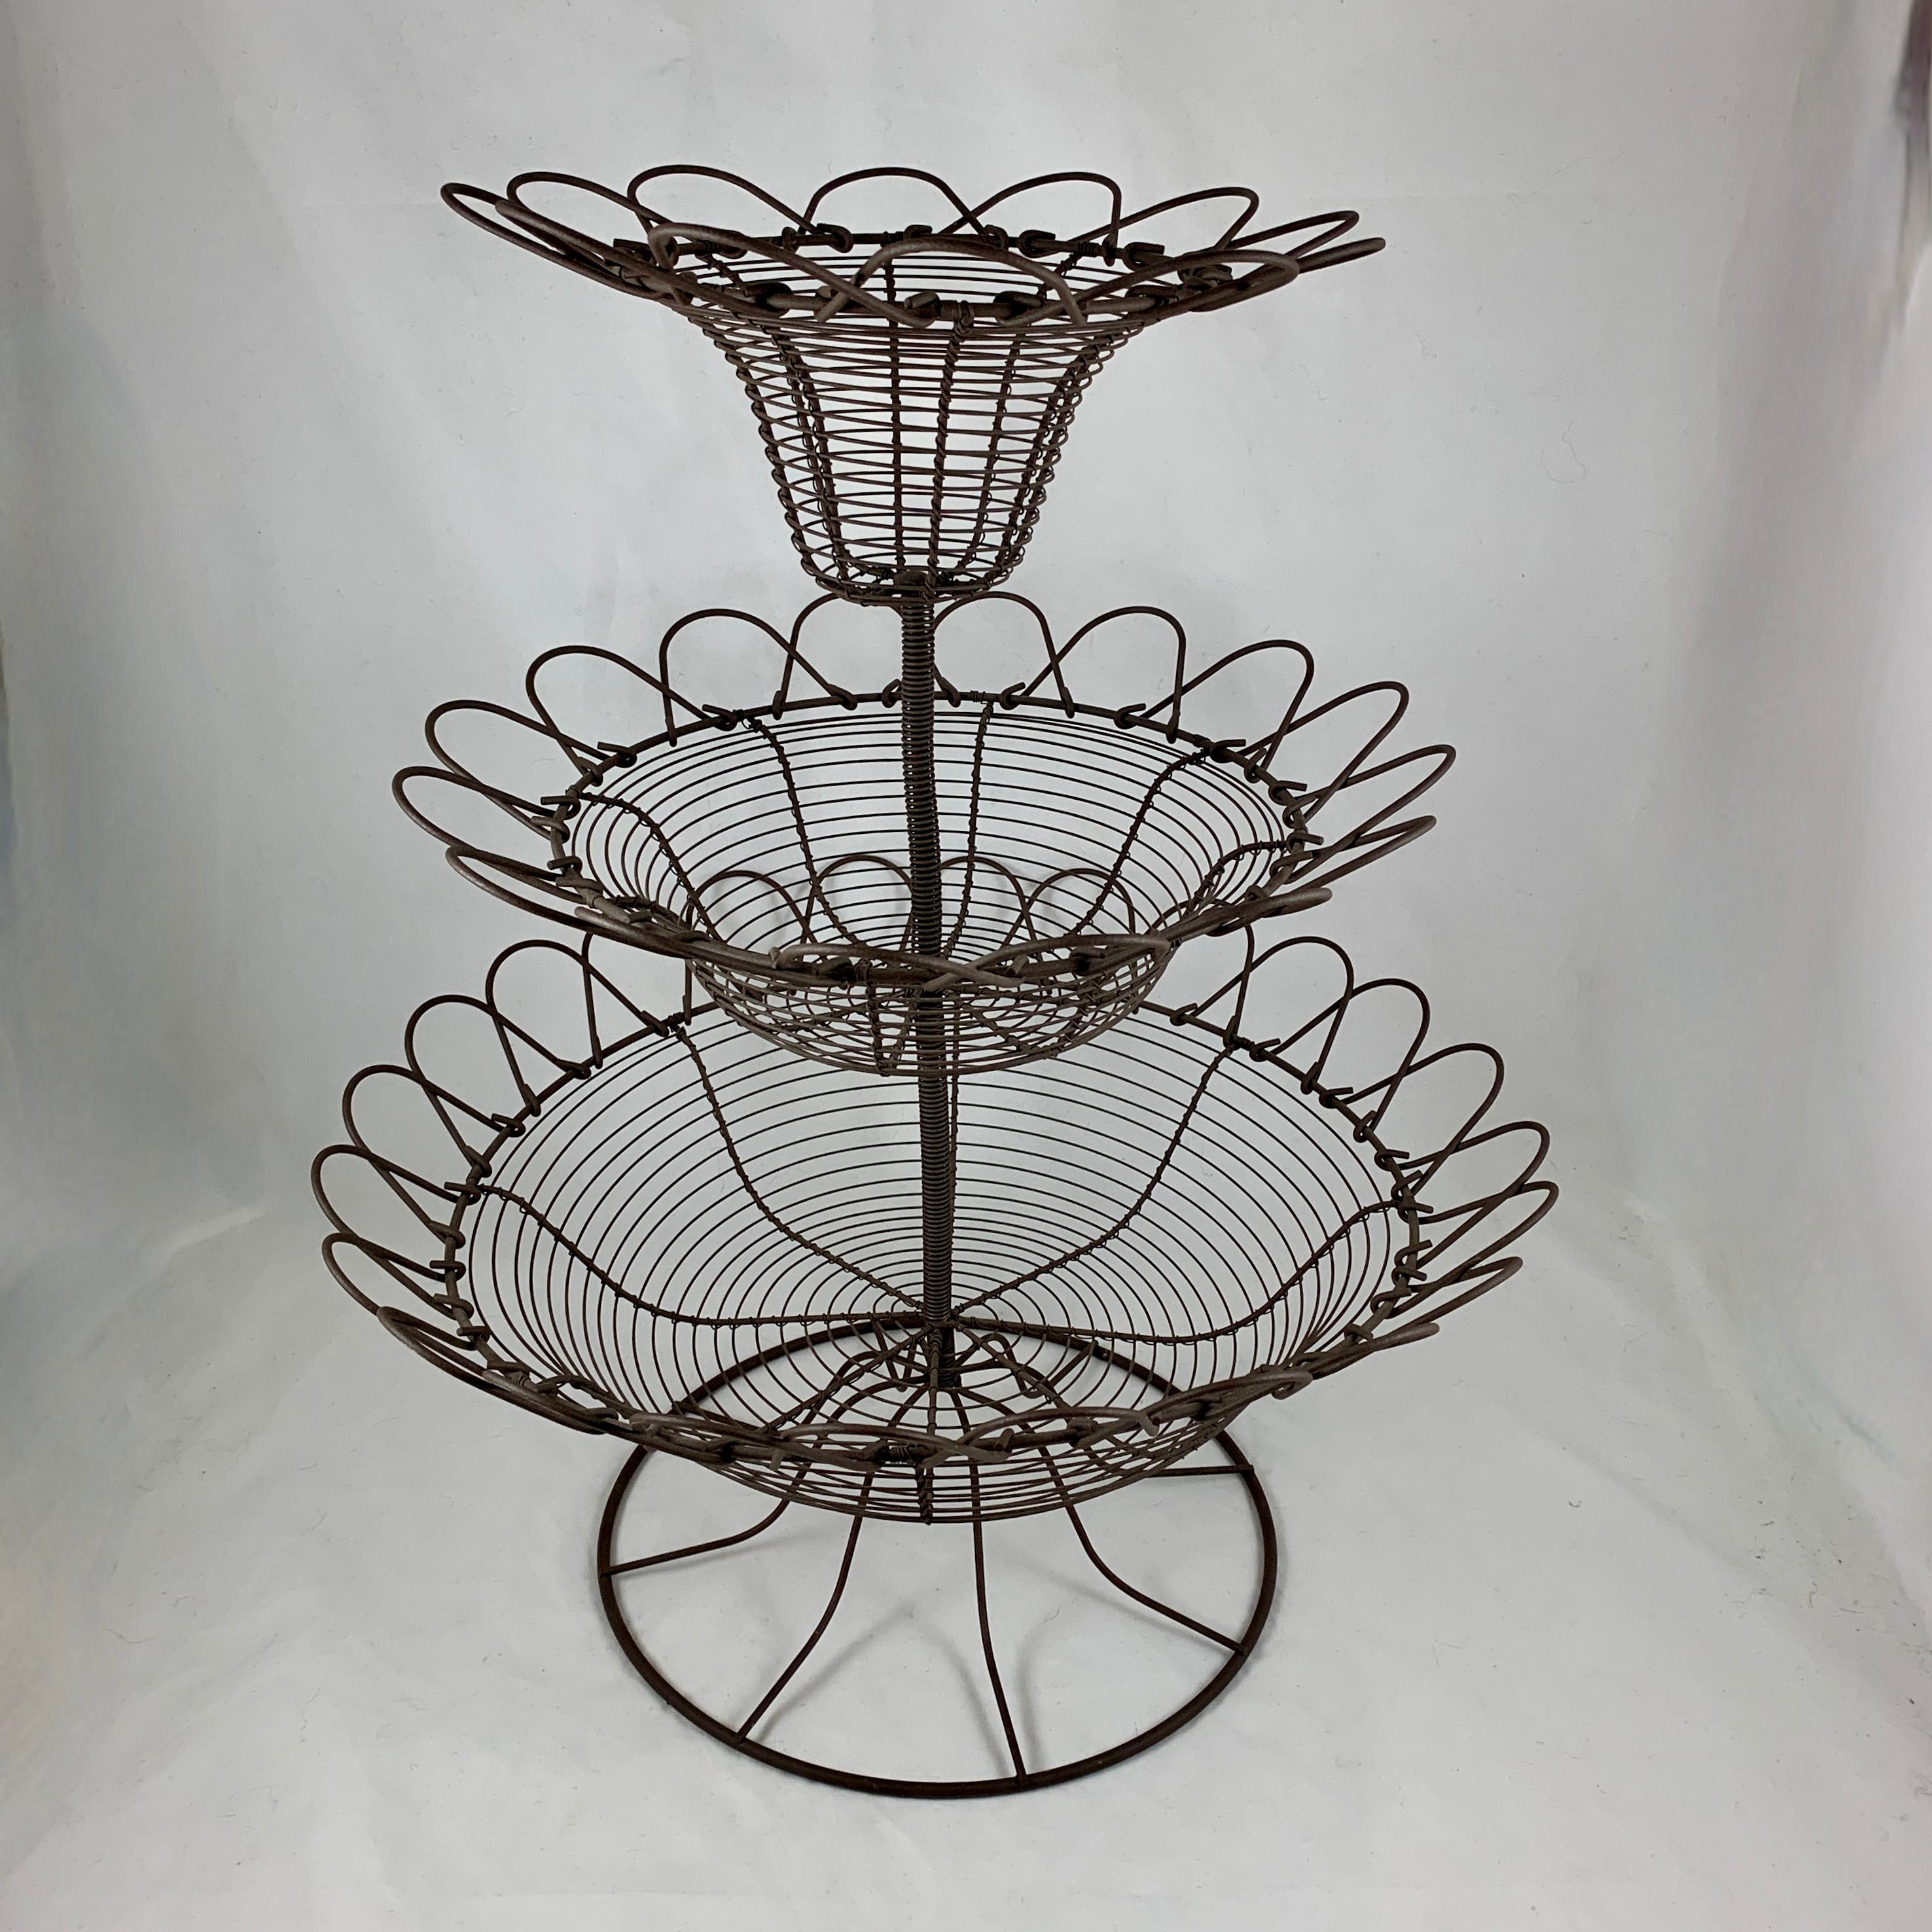 Antique French Triple Tier Handmade Twisted Black Wire Kitchen or Flower Basket 2